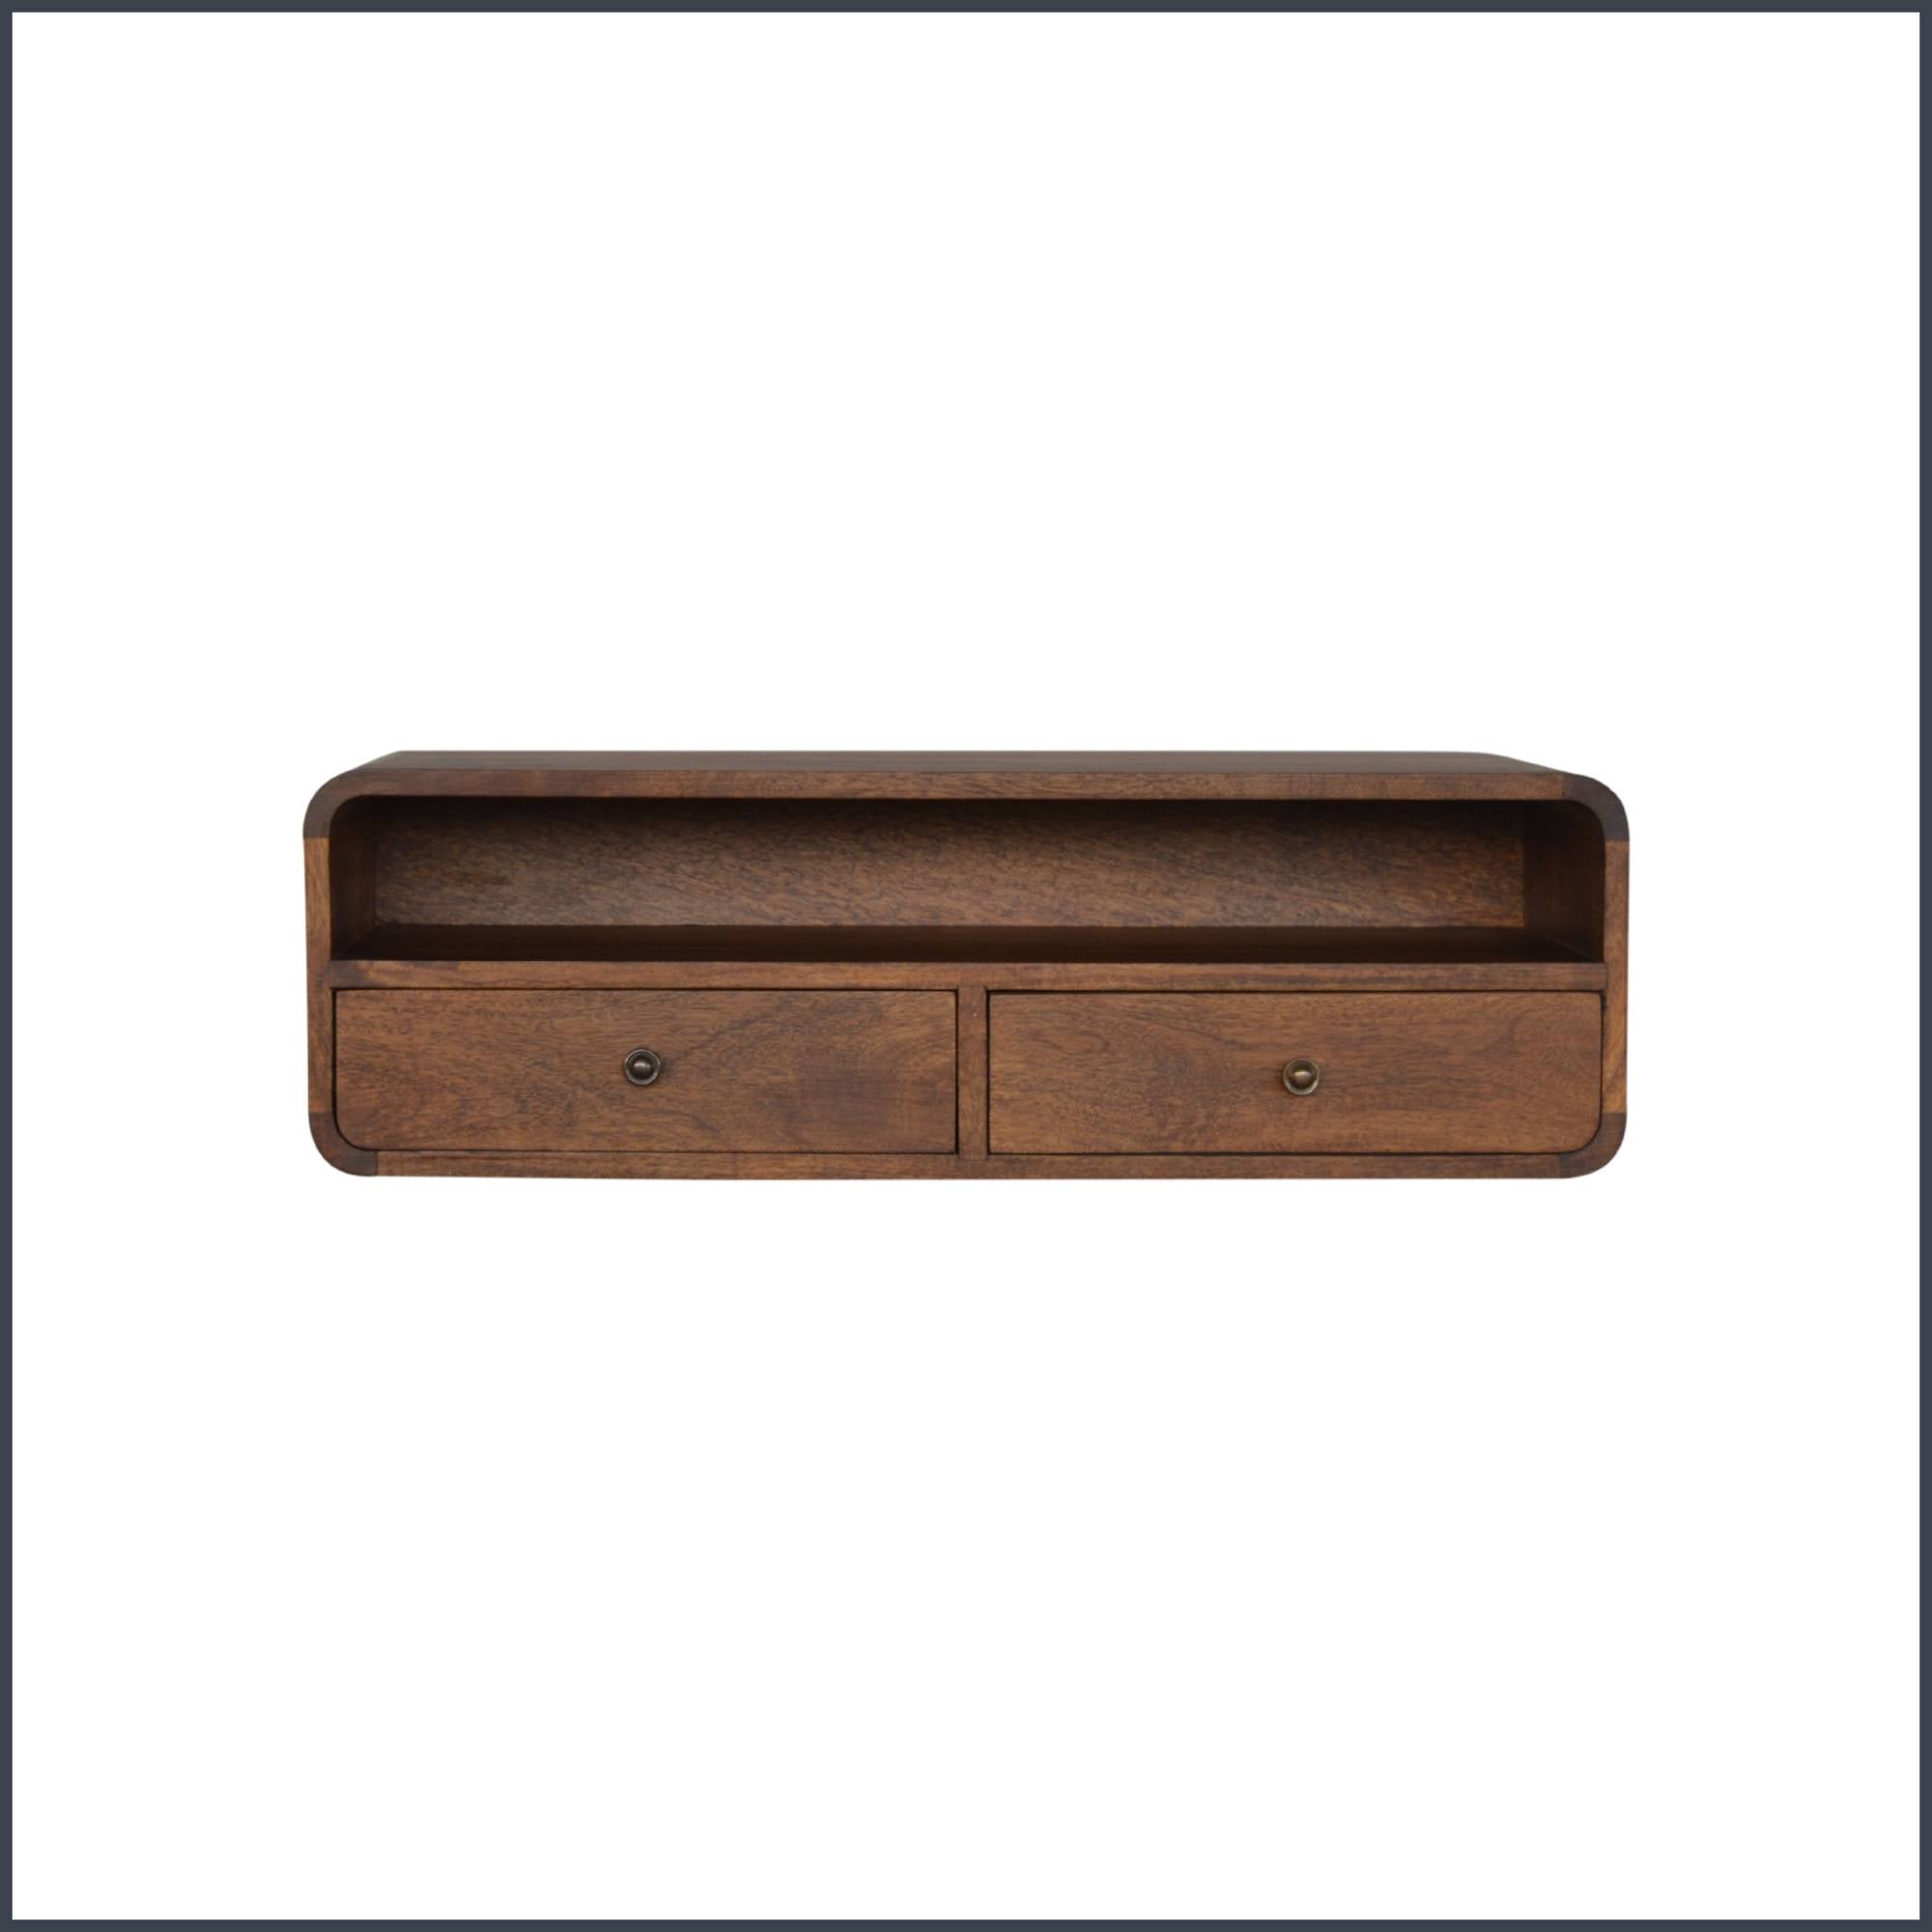 Century handmade solid wood wall mounted console table with 2 drawers and open shelf in deep chestnut finish | malletandplane.com